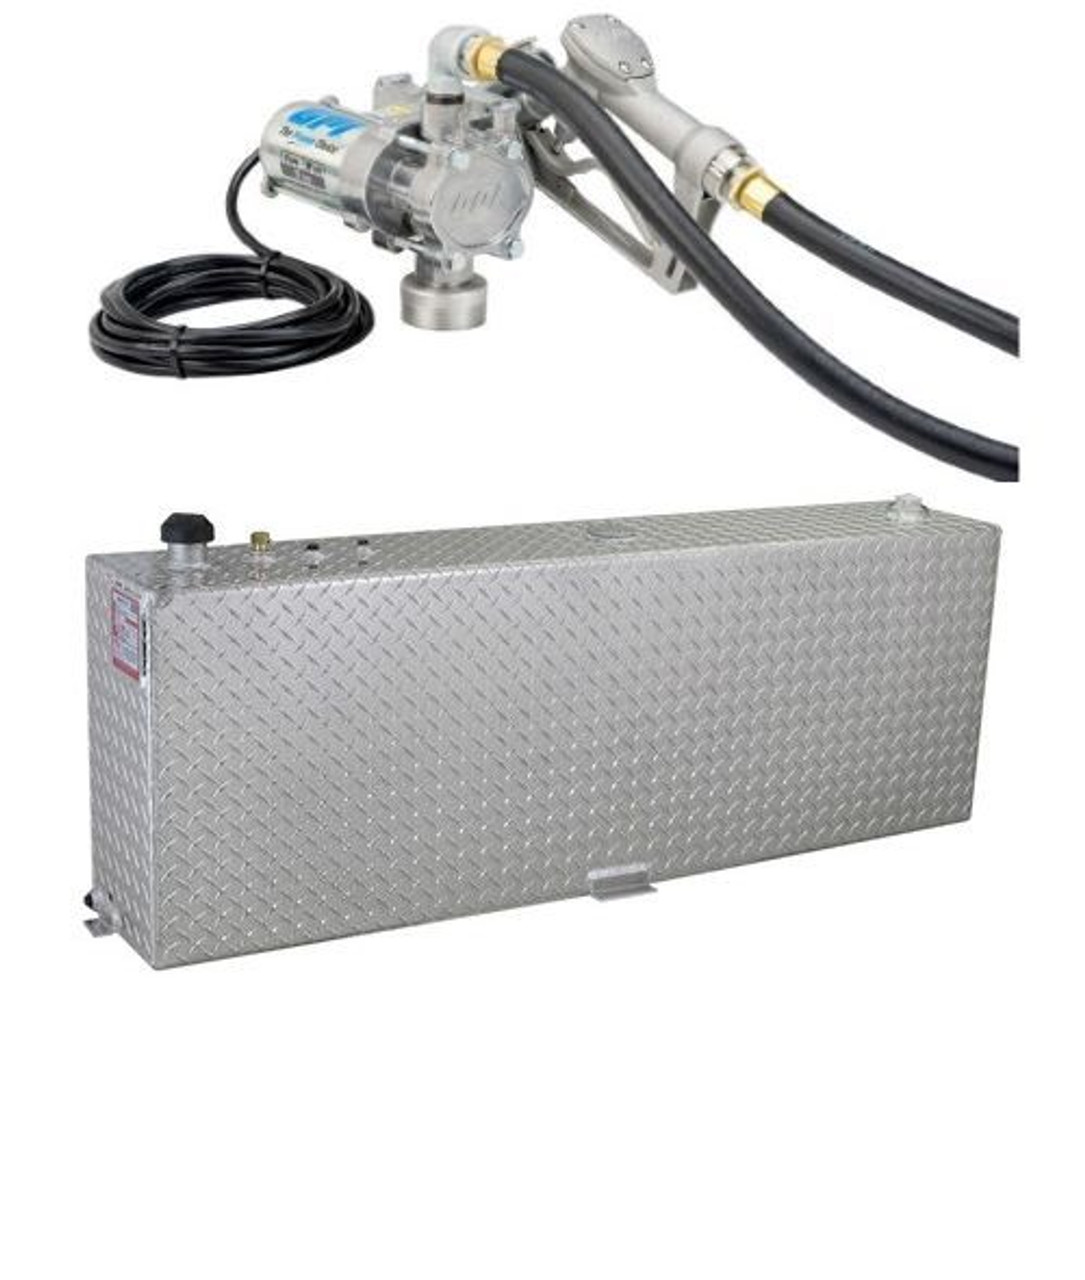 RDS 45 Gallon Aluminum DOT Certified Tank with 8 GPM Transfer Pump